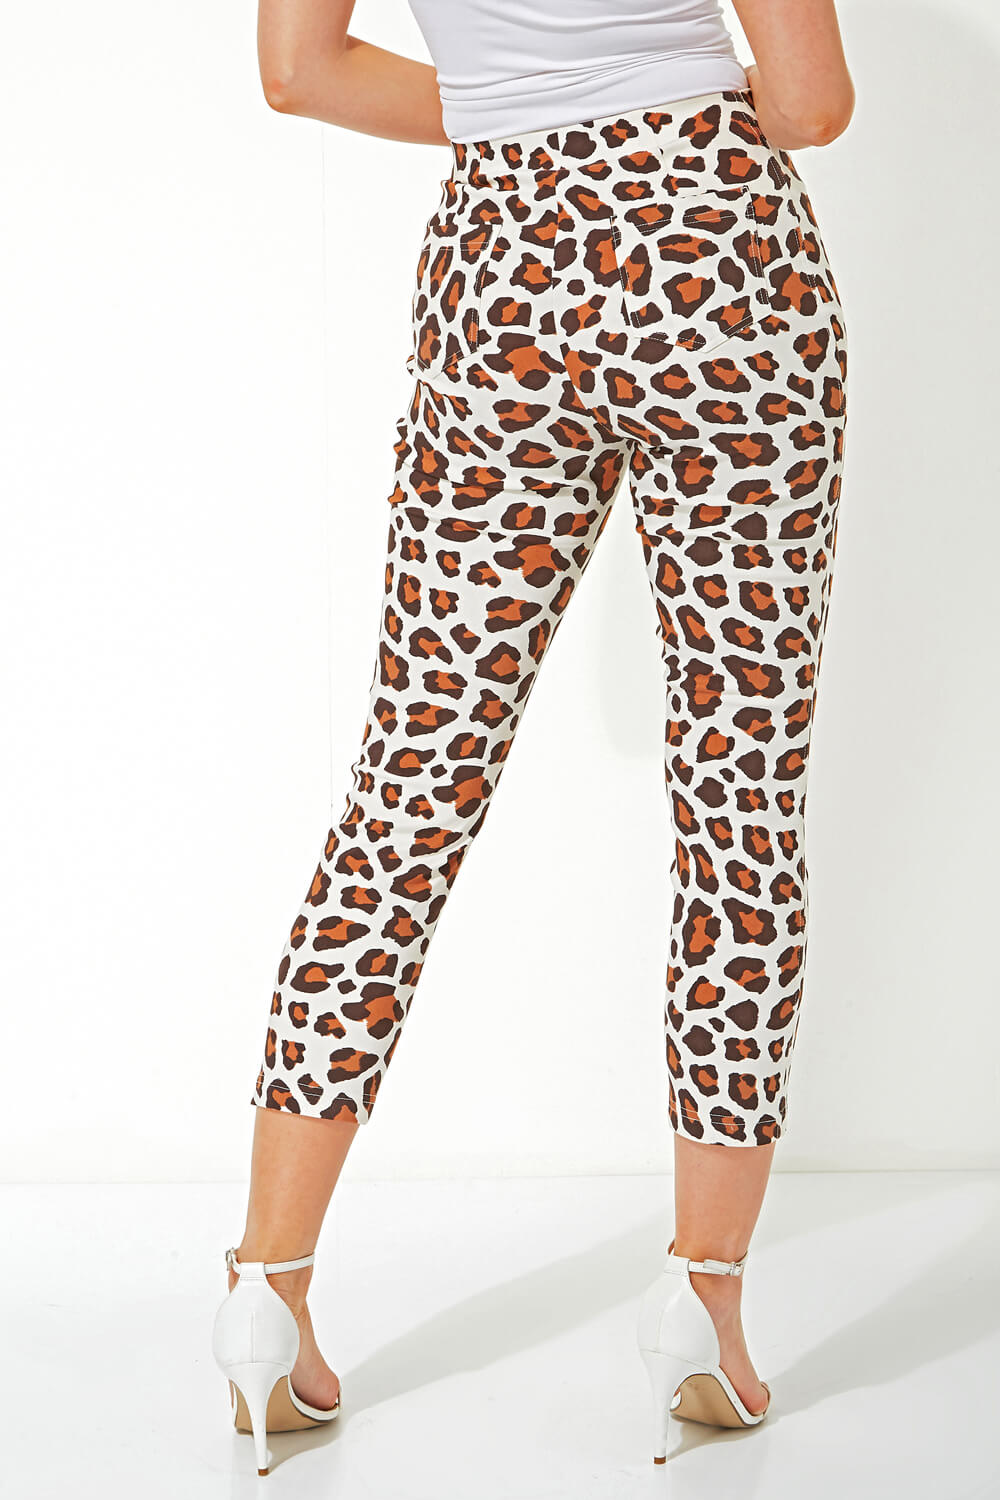 Tan Animal Print 3/4 Length Stretch Trousers , Image 2 of 4